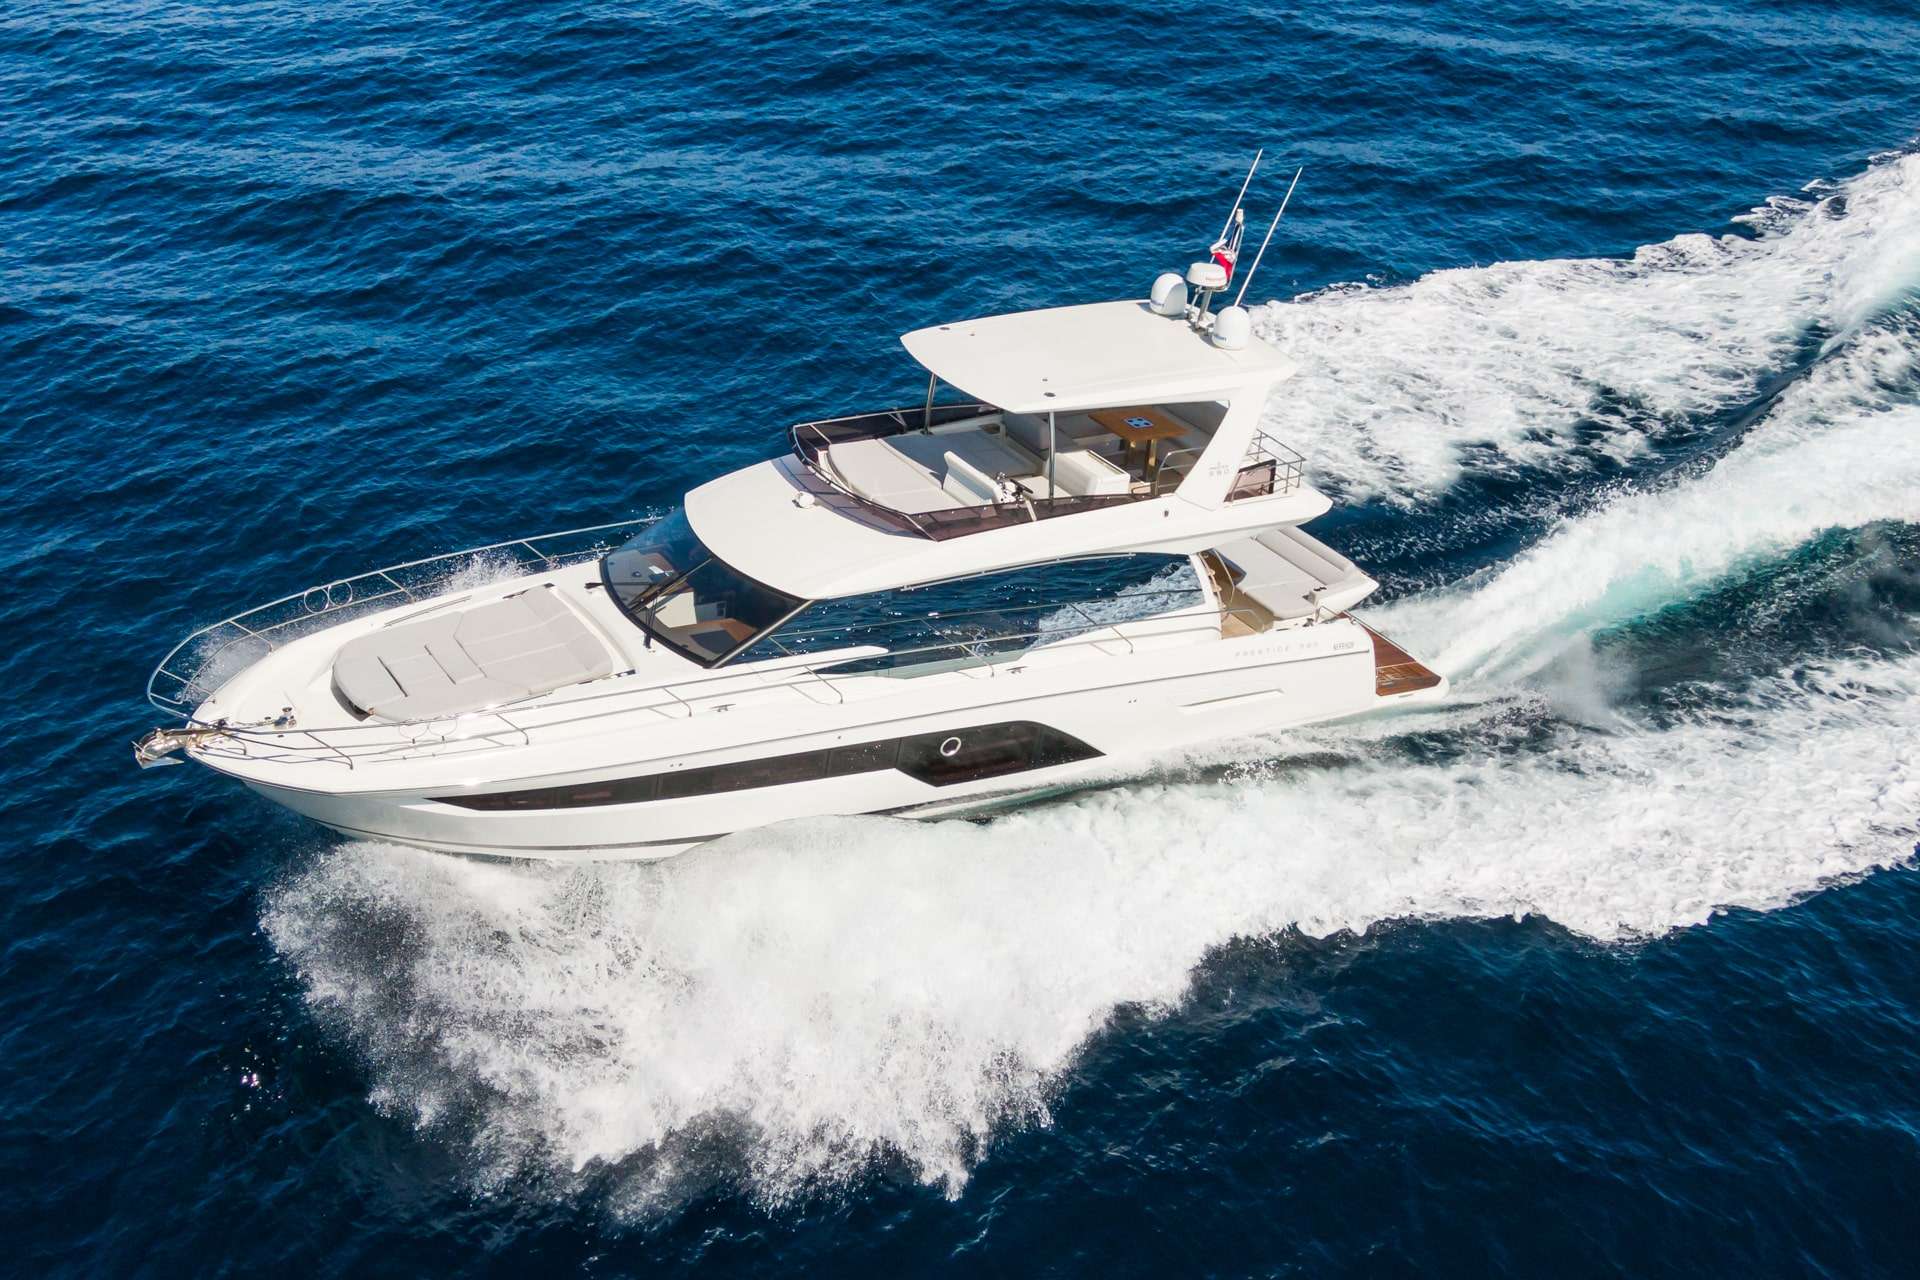 590 Fly - Motor Boat Charter France & Boat hire in France French Riviera Cannes Vieux port de Vallauris 4